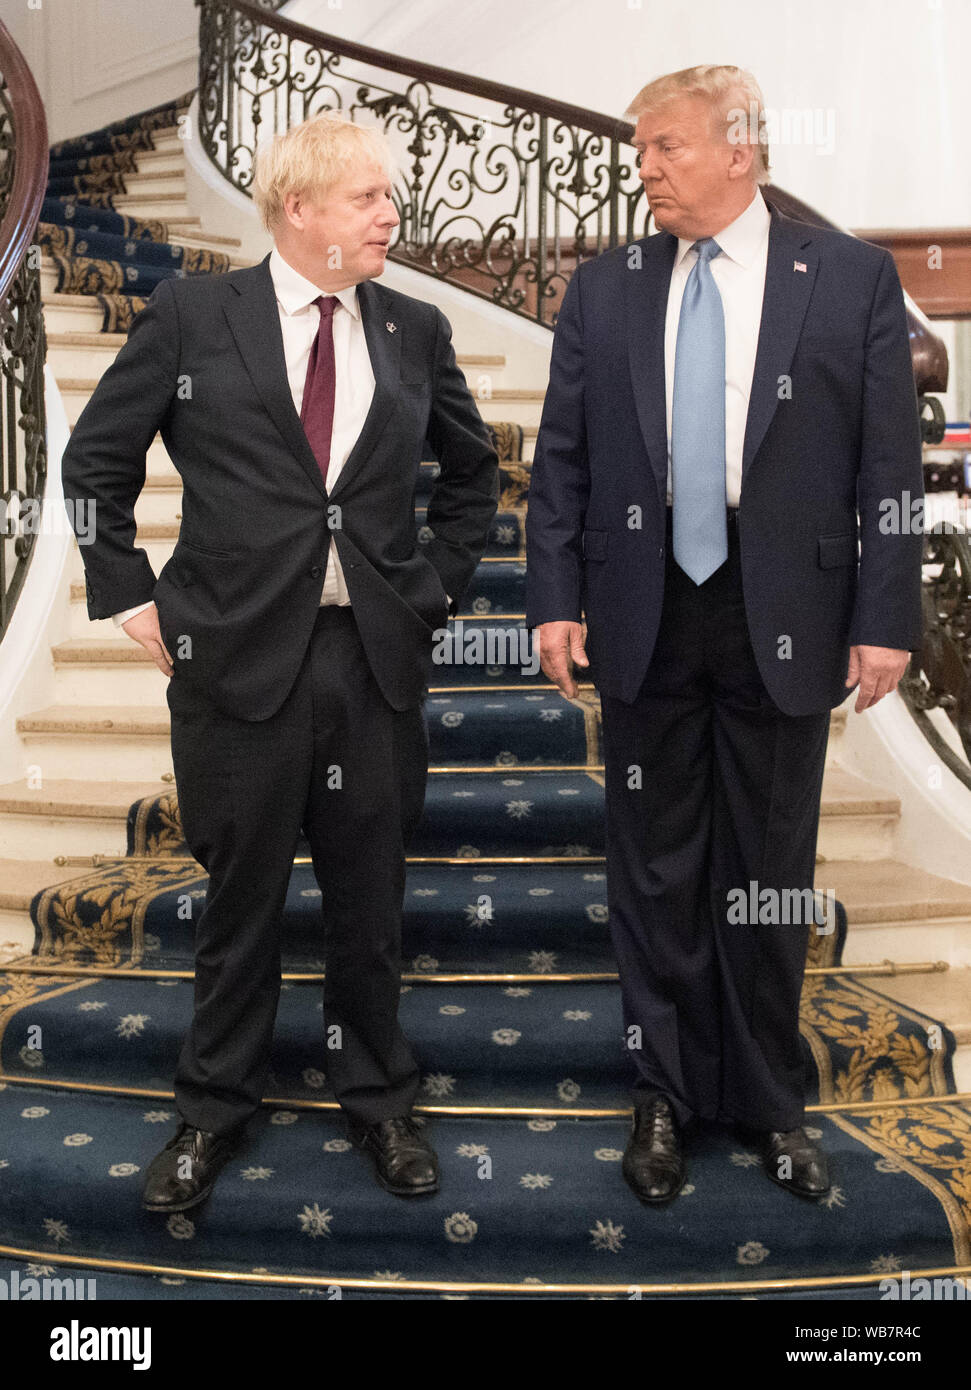 Prime Minister Boris Johnson meeting US President Donald Trump for bilateral talks during the G7 summit in Biarritz, France. Stock Photo